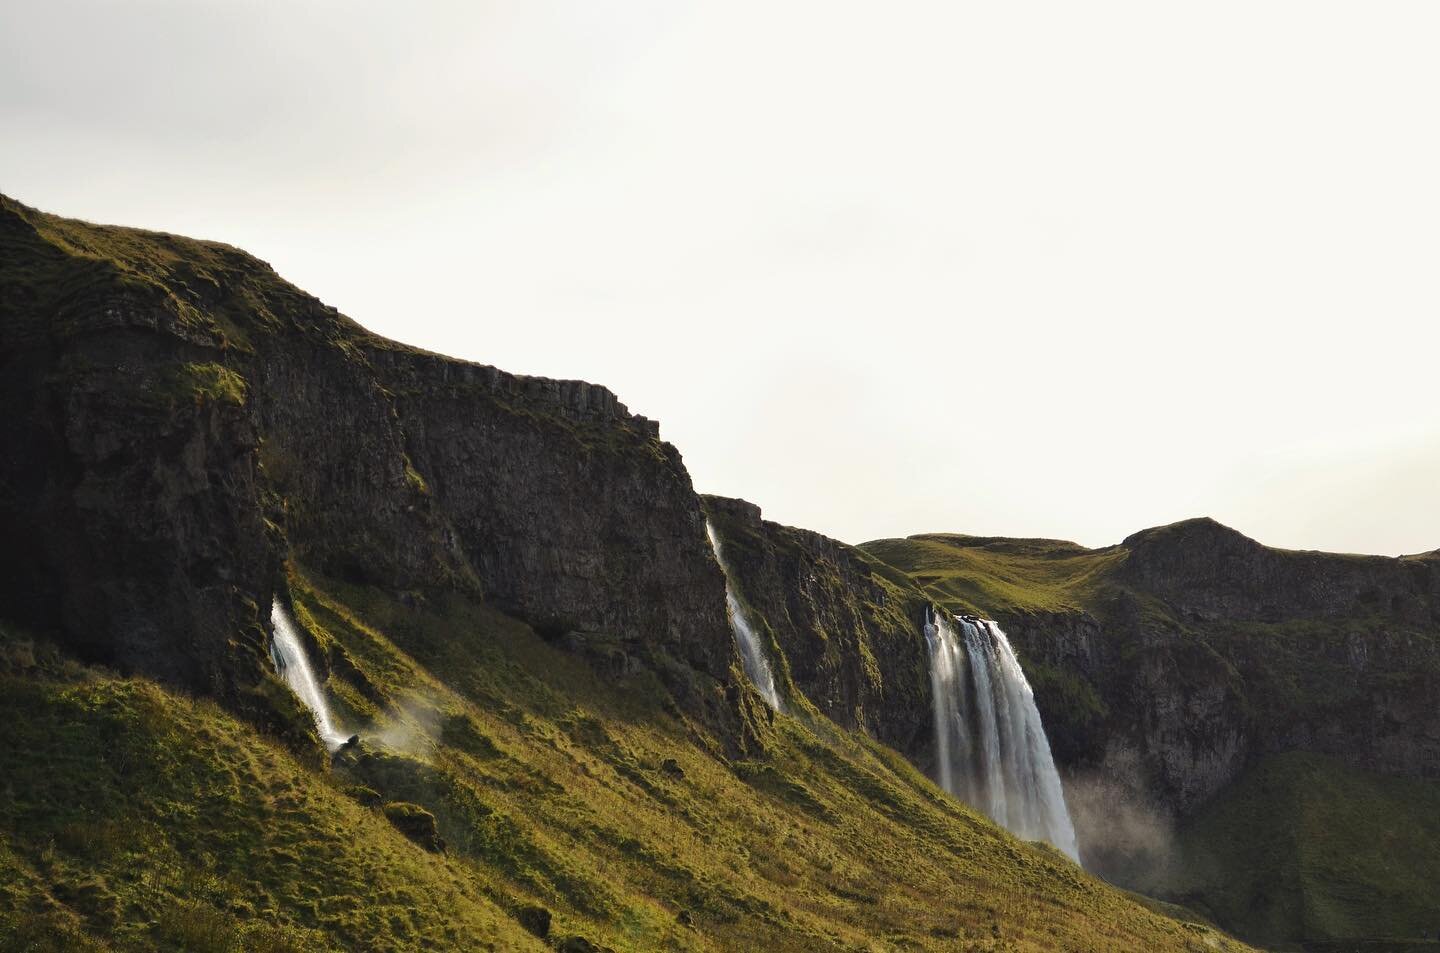 Waterfalls send their magical mist across the greenery of Iceland in one of my favorite shots on this island.

12 days in Iceland and we hit nowhere near the amount of waterfalls that were on my bucketlist. I can't wait to go back and see what other 